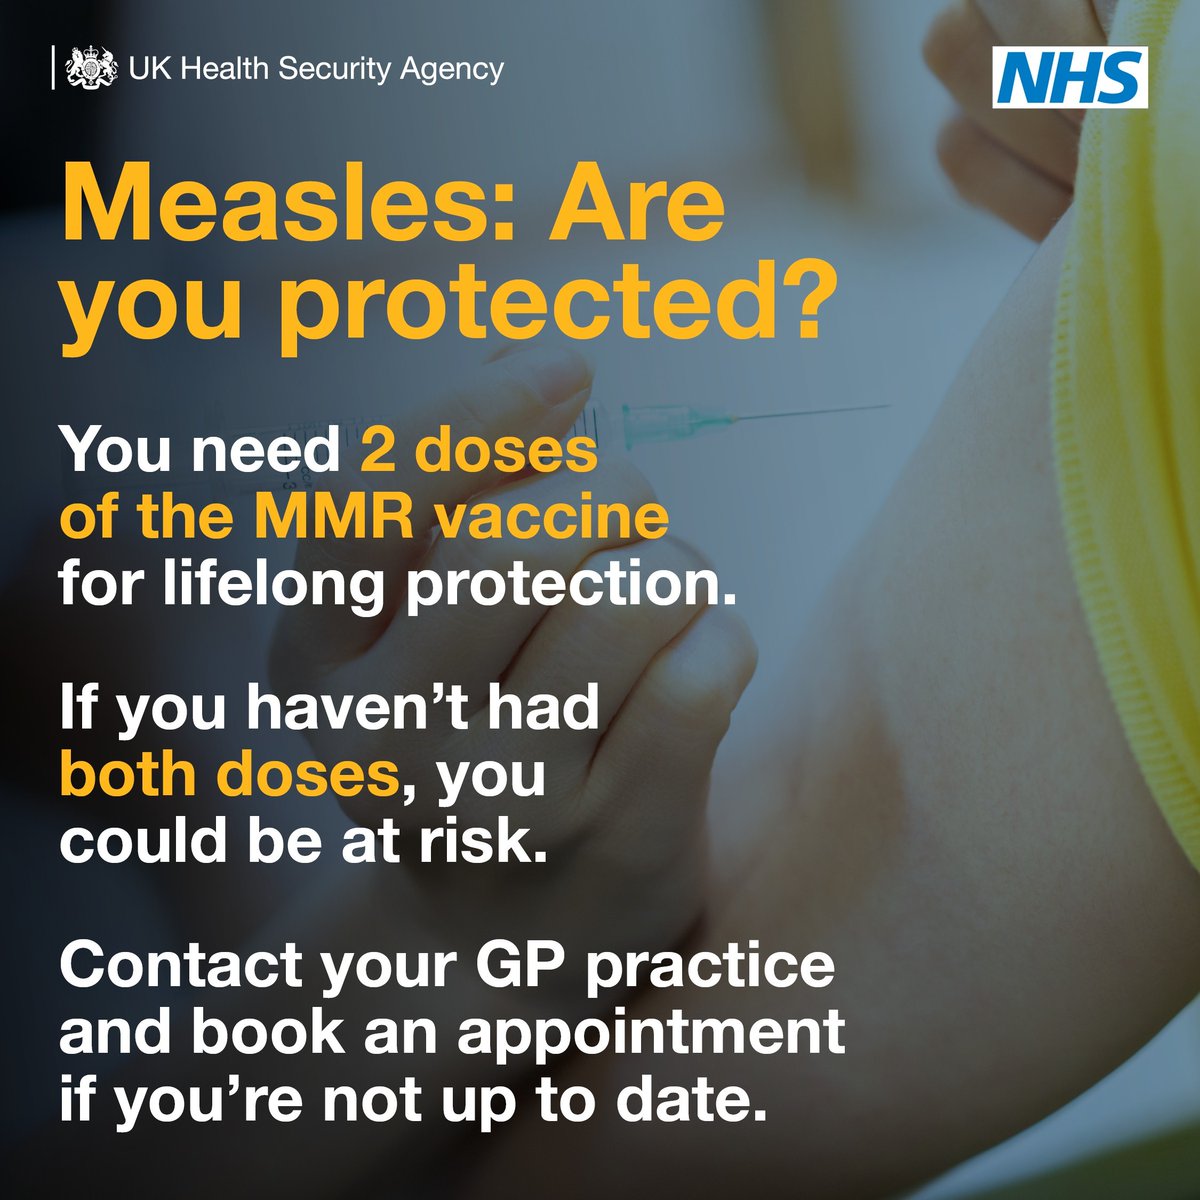 Getting lifelong protection against measles is simple – you just need to have two doses of the MMR vaccine. If you think you or a loved one isn’t up to date, contact your GP practice to book a catch up appointment.